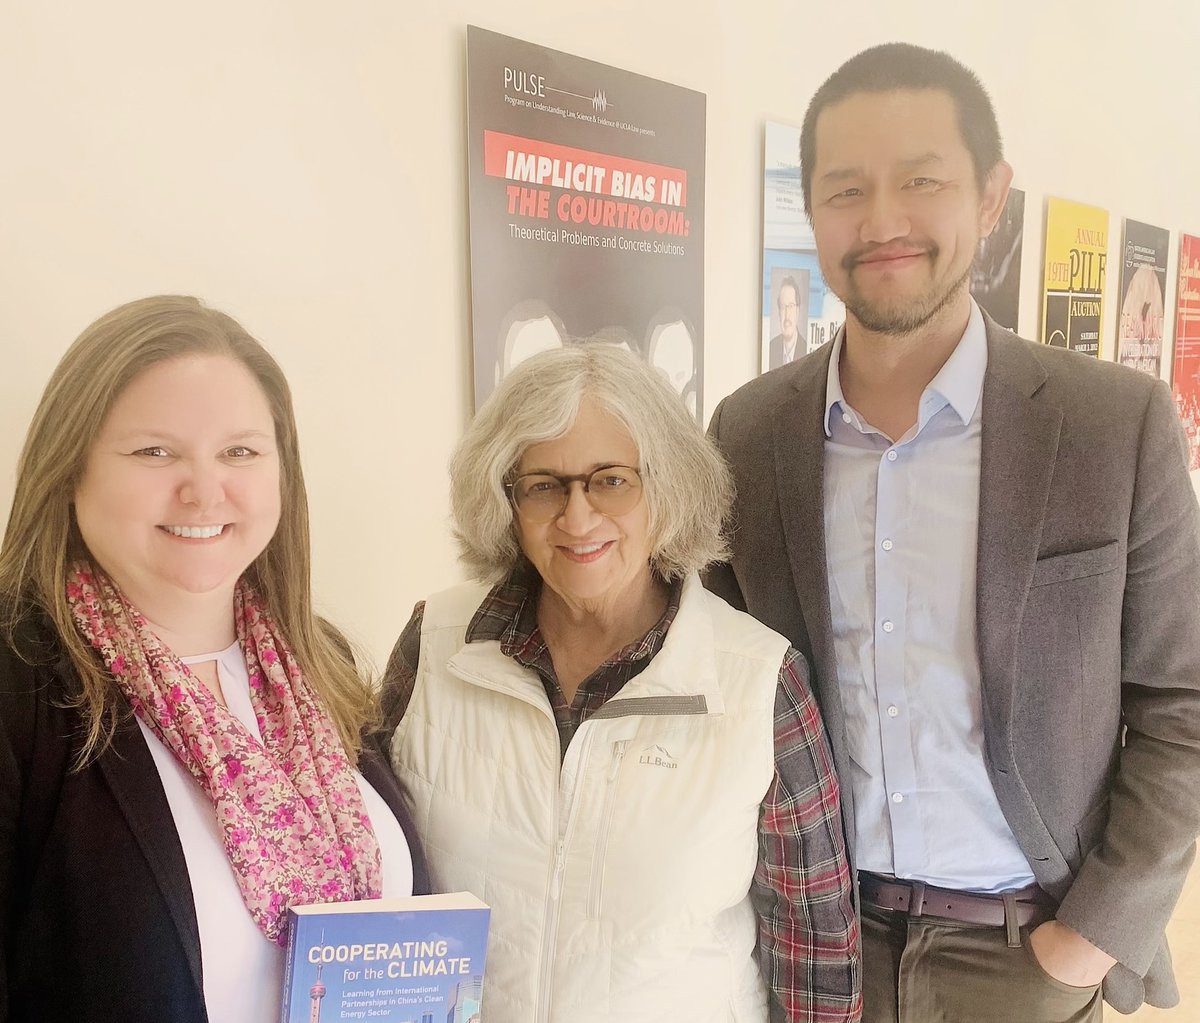 Thanks to @UCLALawEmmett & @greenlawchina for hosting me last week to talk about my book #CooperatingfortheClimate, and to the legendary @MaryNicholsCA for attending! Next stop - @UCBerkeley @CalChinaClimate on 4/4.